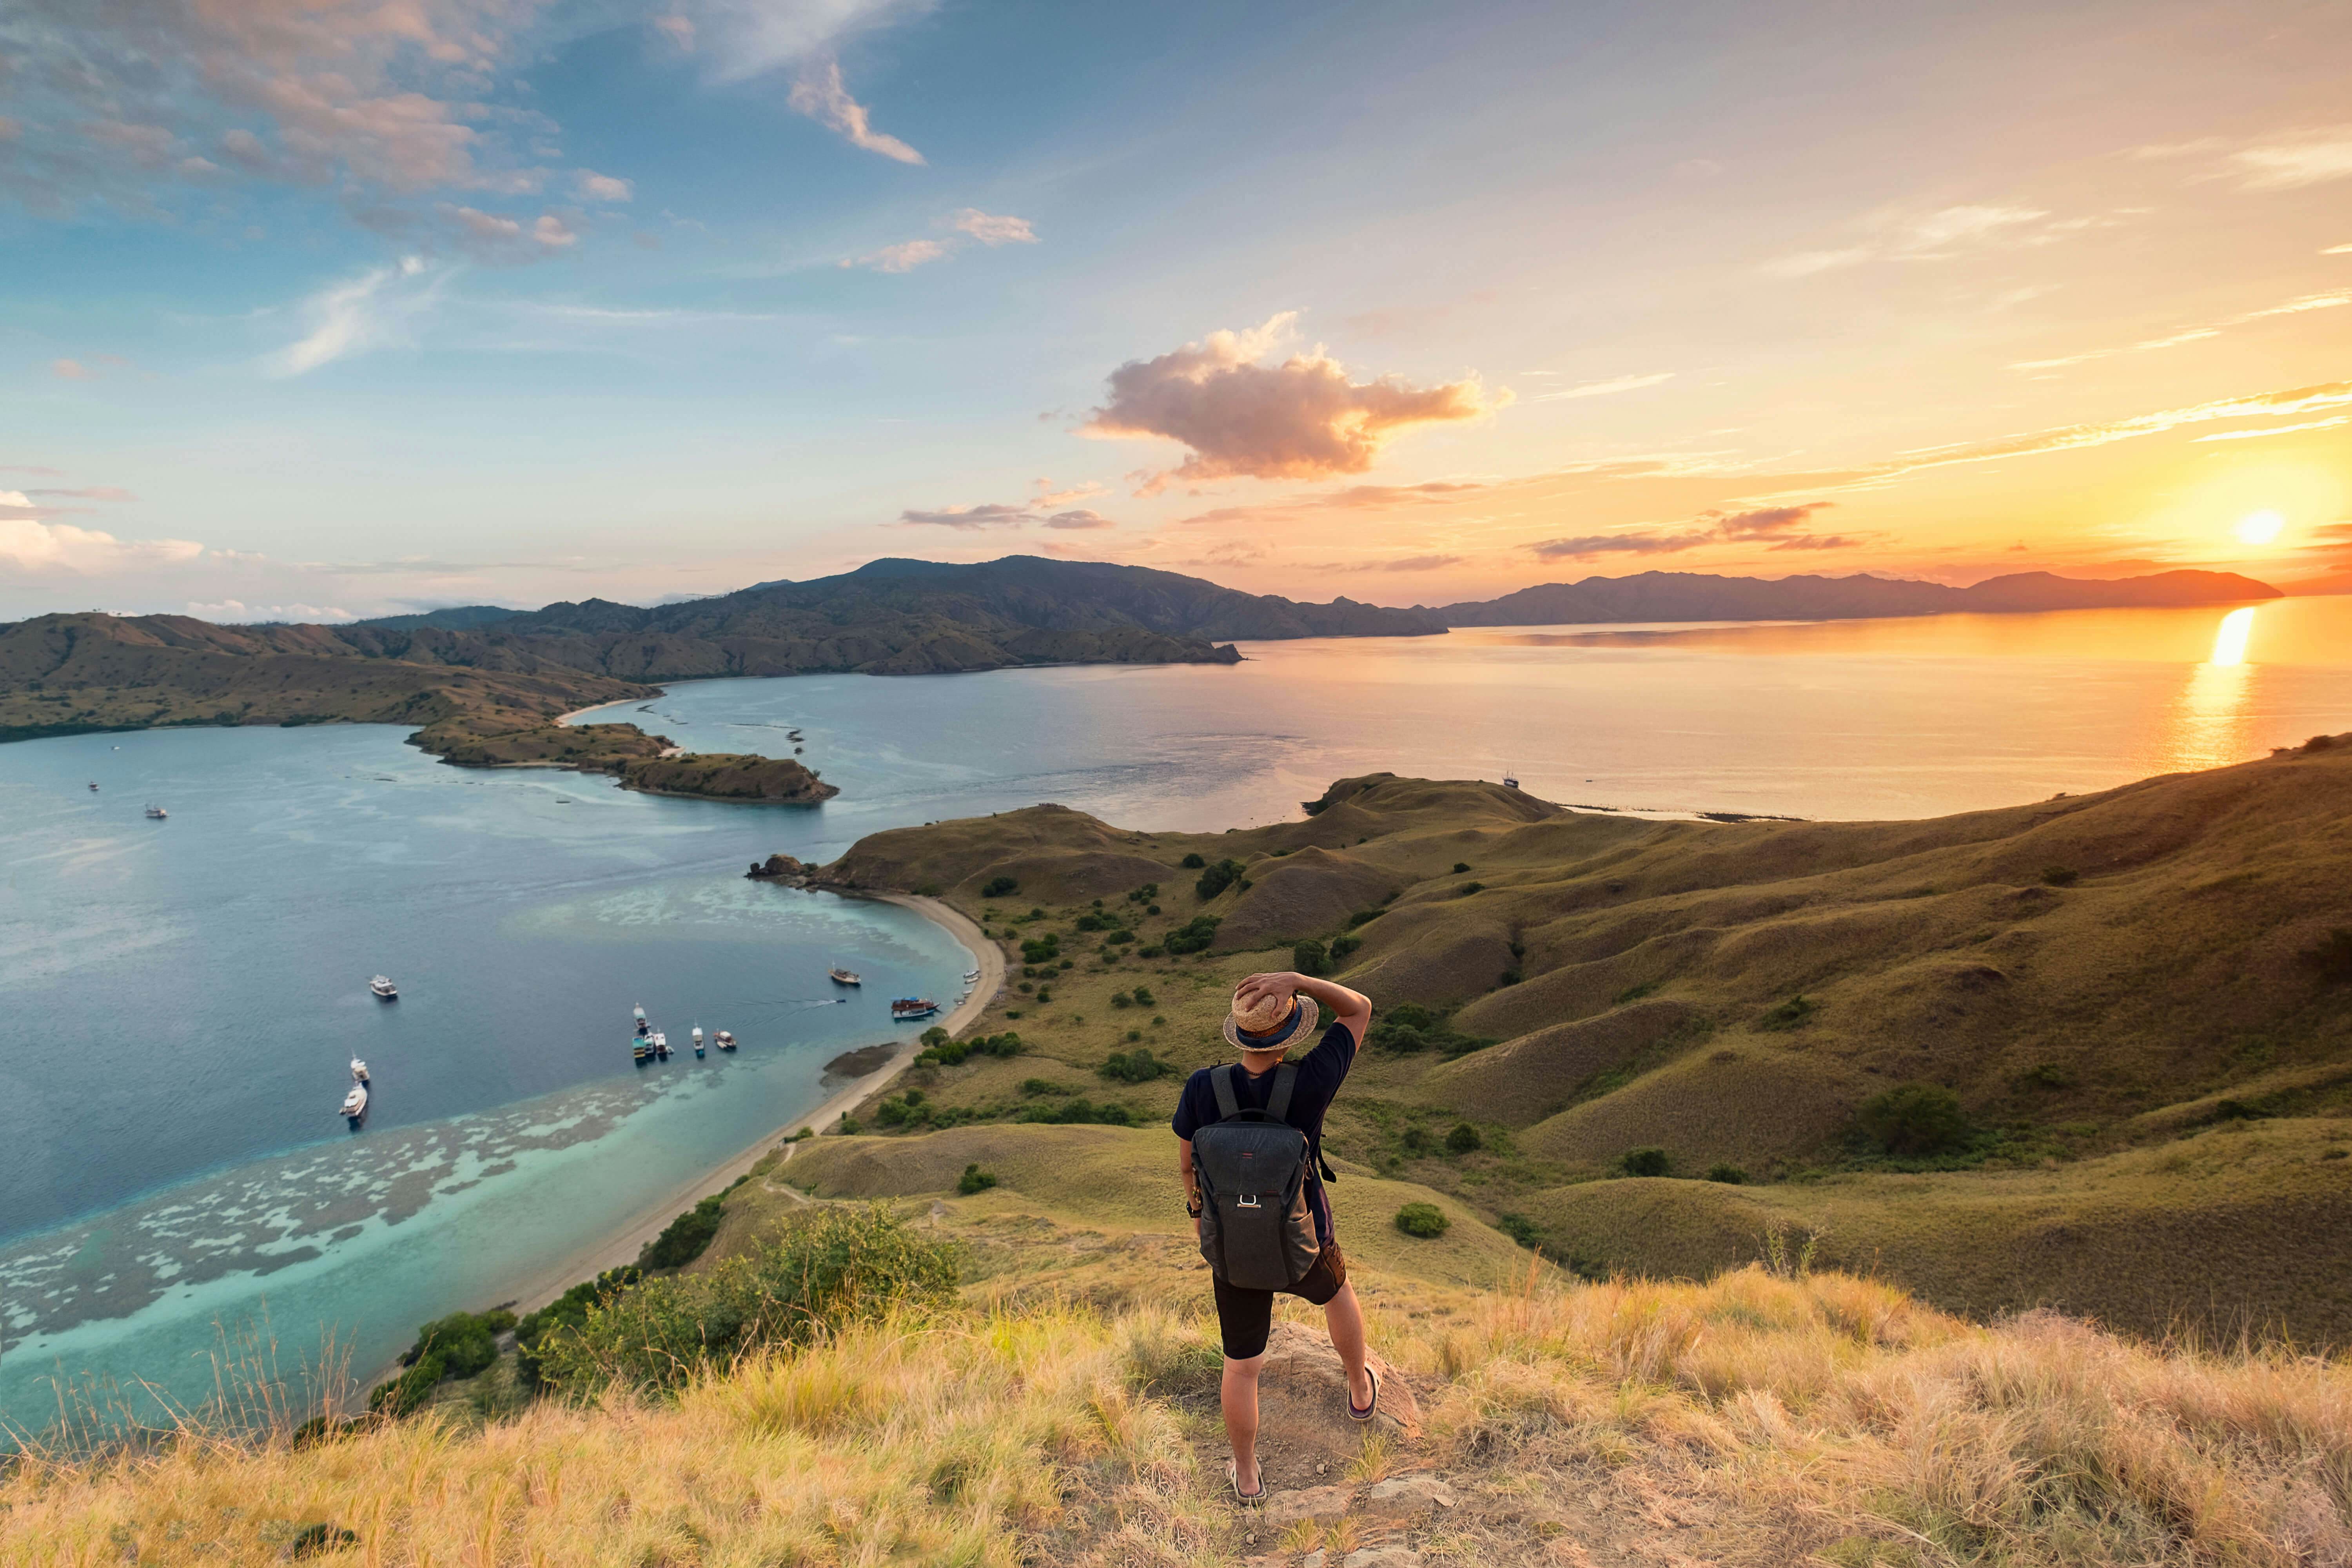 Pulau Ai Travel Stories - Lonely Planet